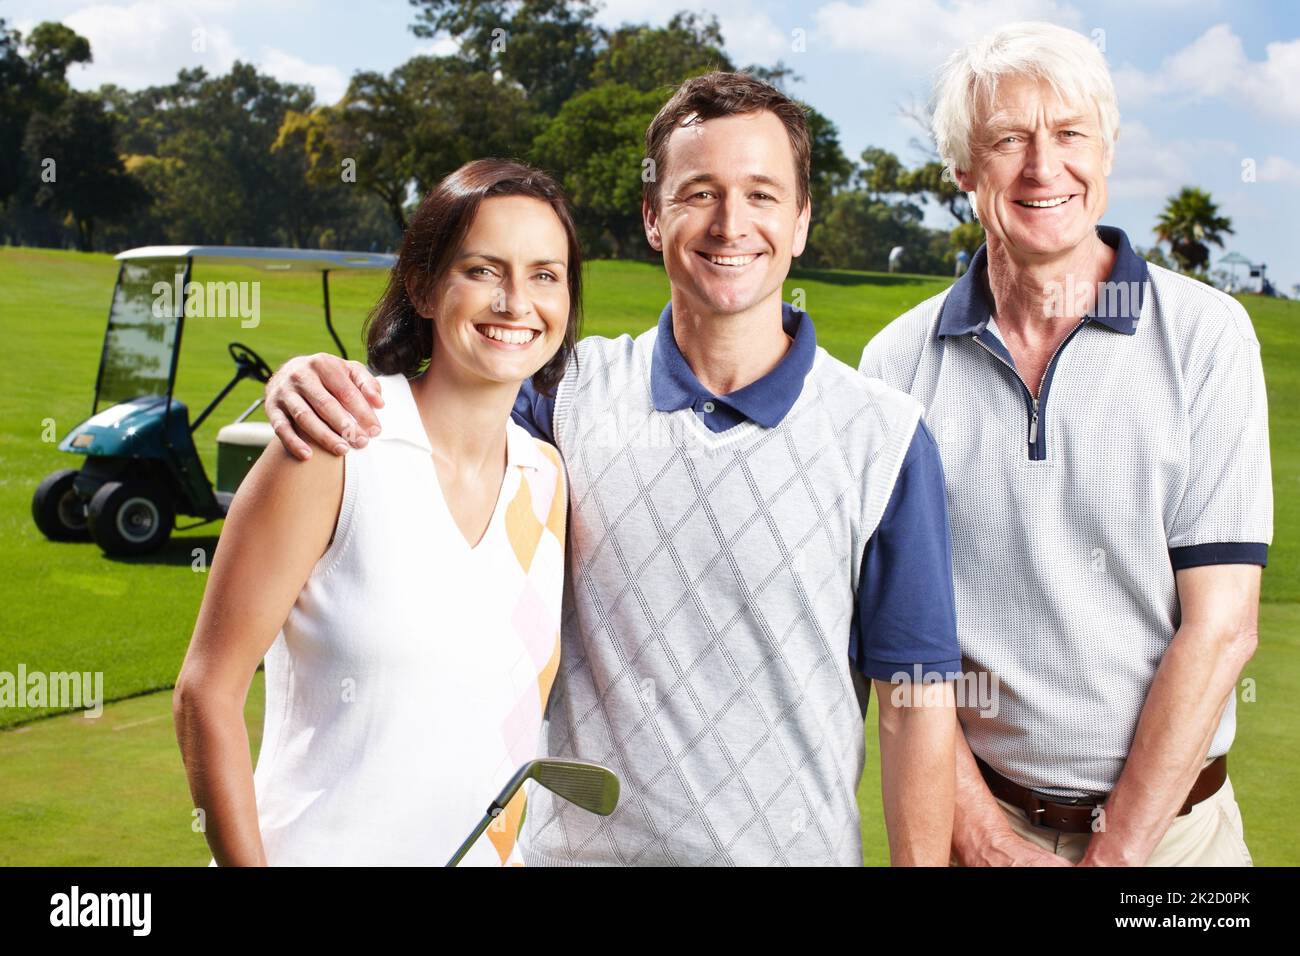 Bonding through a love of golf. Smiling golfing companions on the green with their golf cart in the background. Stock Photo